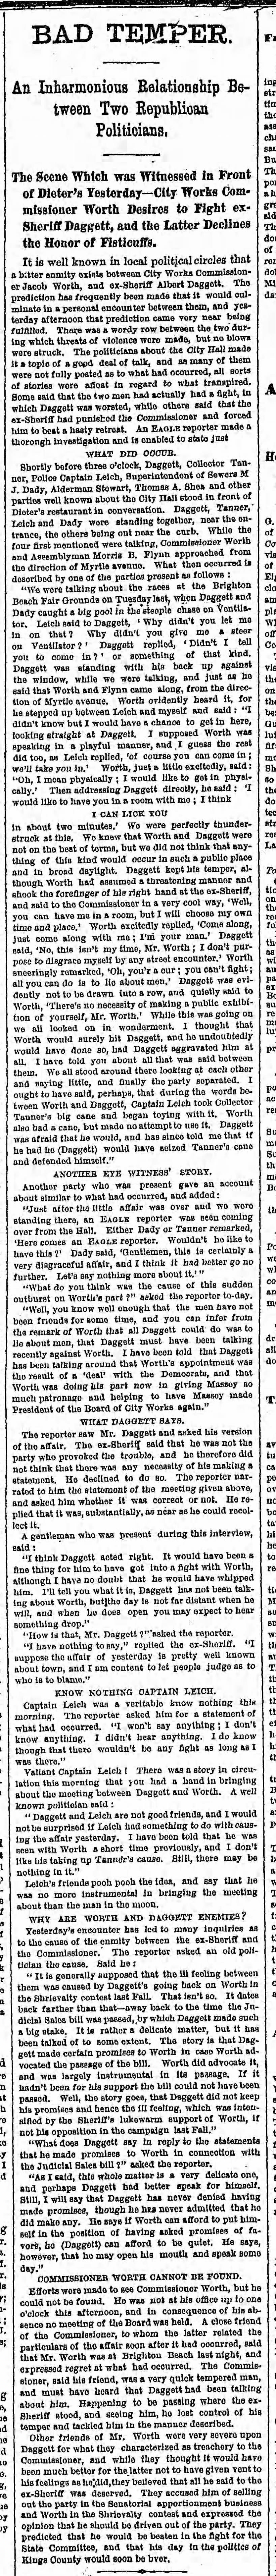 Friday, August 8, 1879 - Page 4